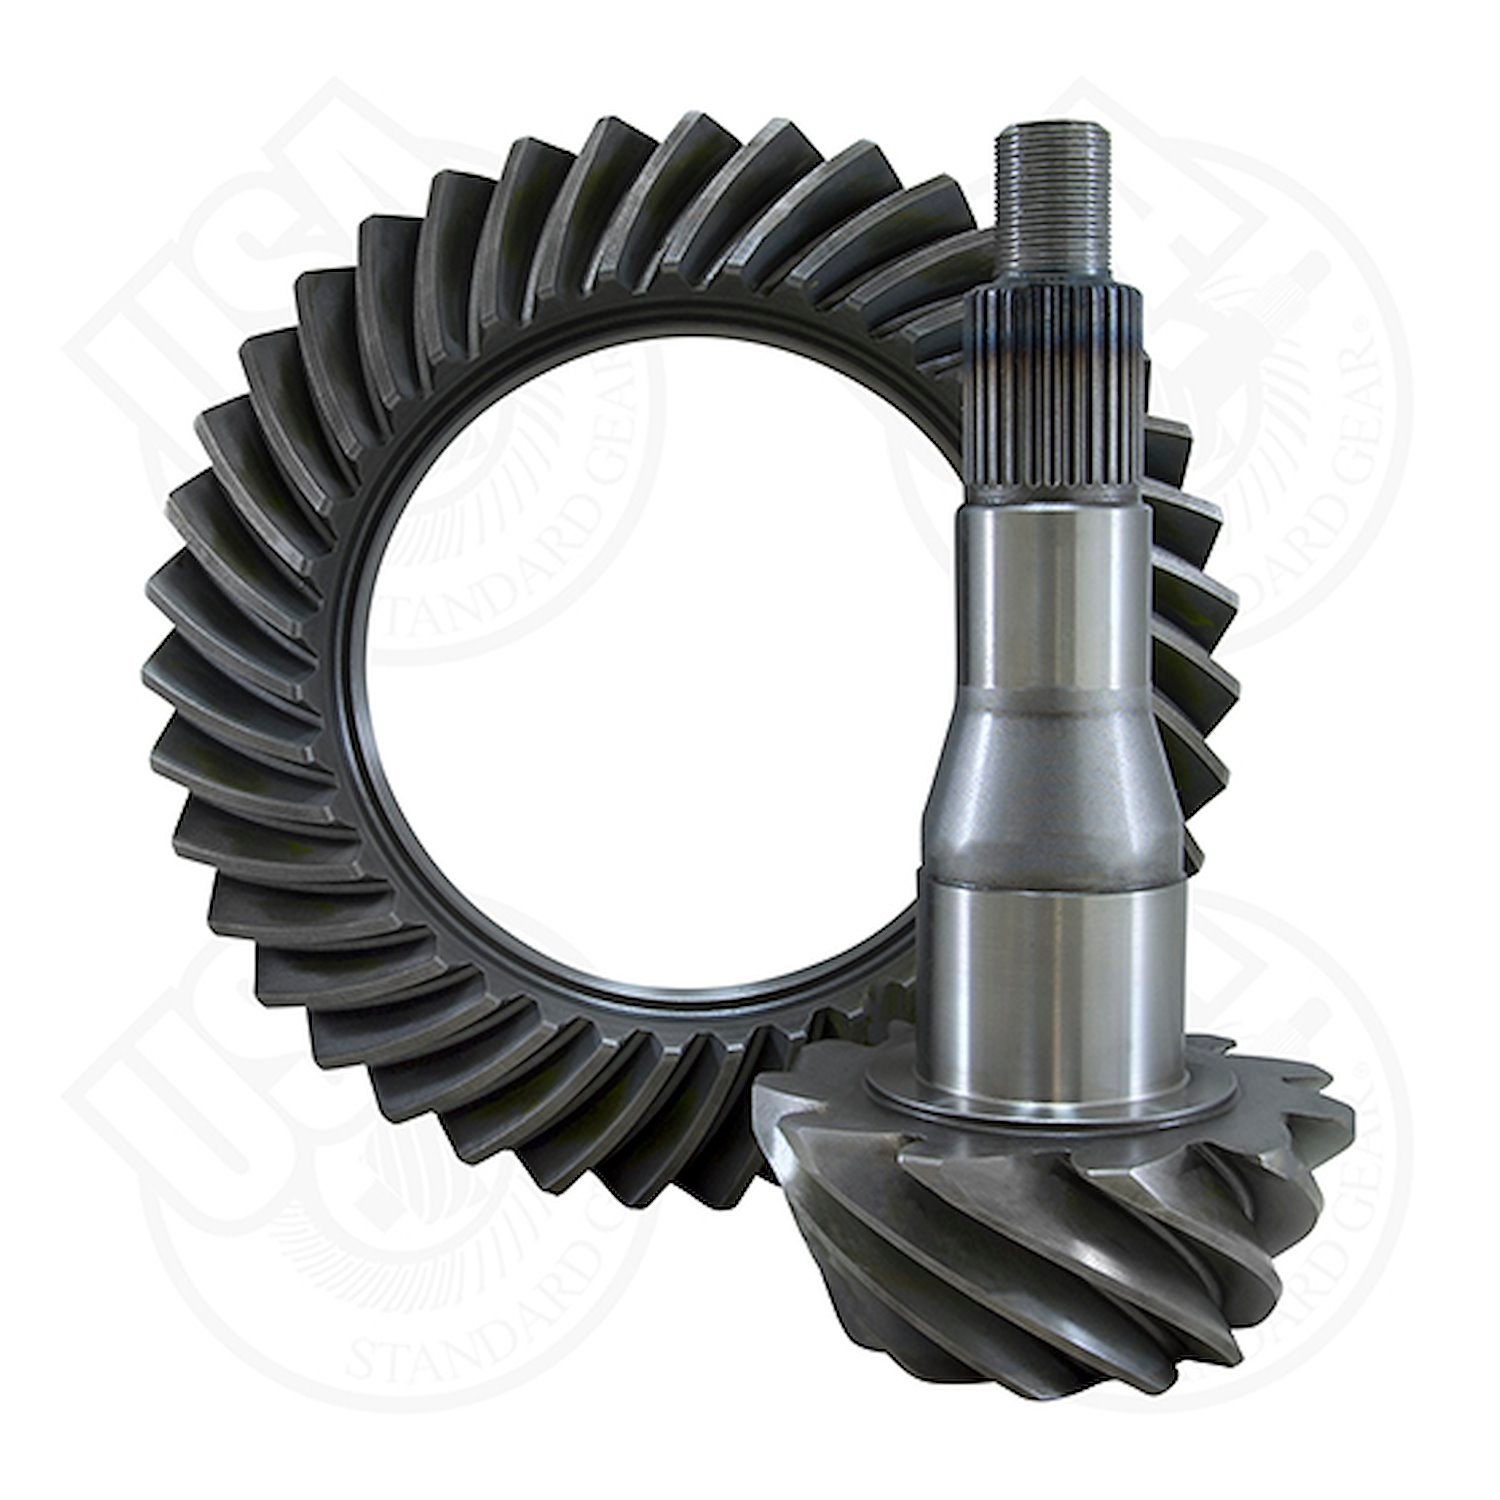 USA Standard Ring / Pinion 11 / up Ford 9.75 3.73 ratio